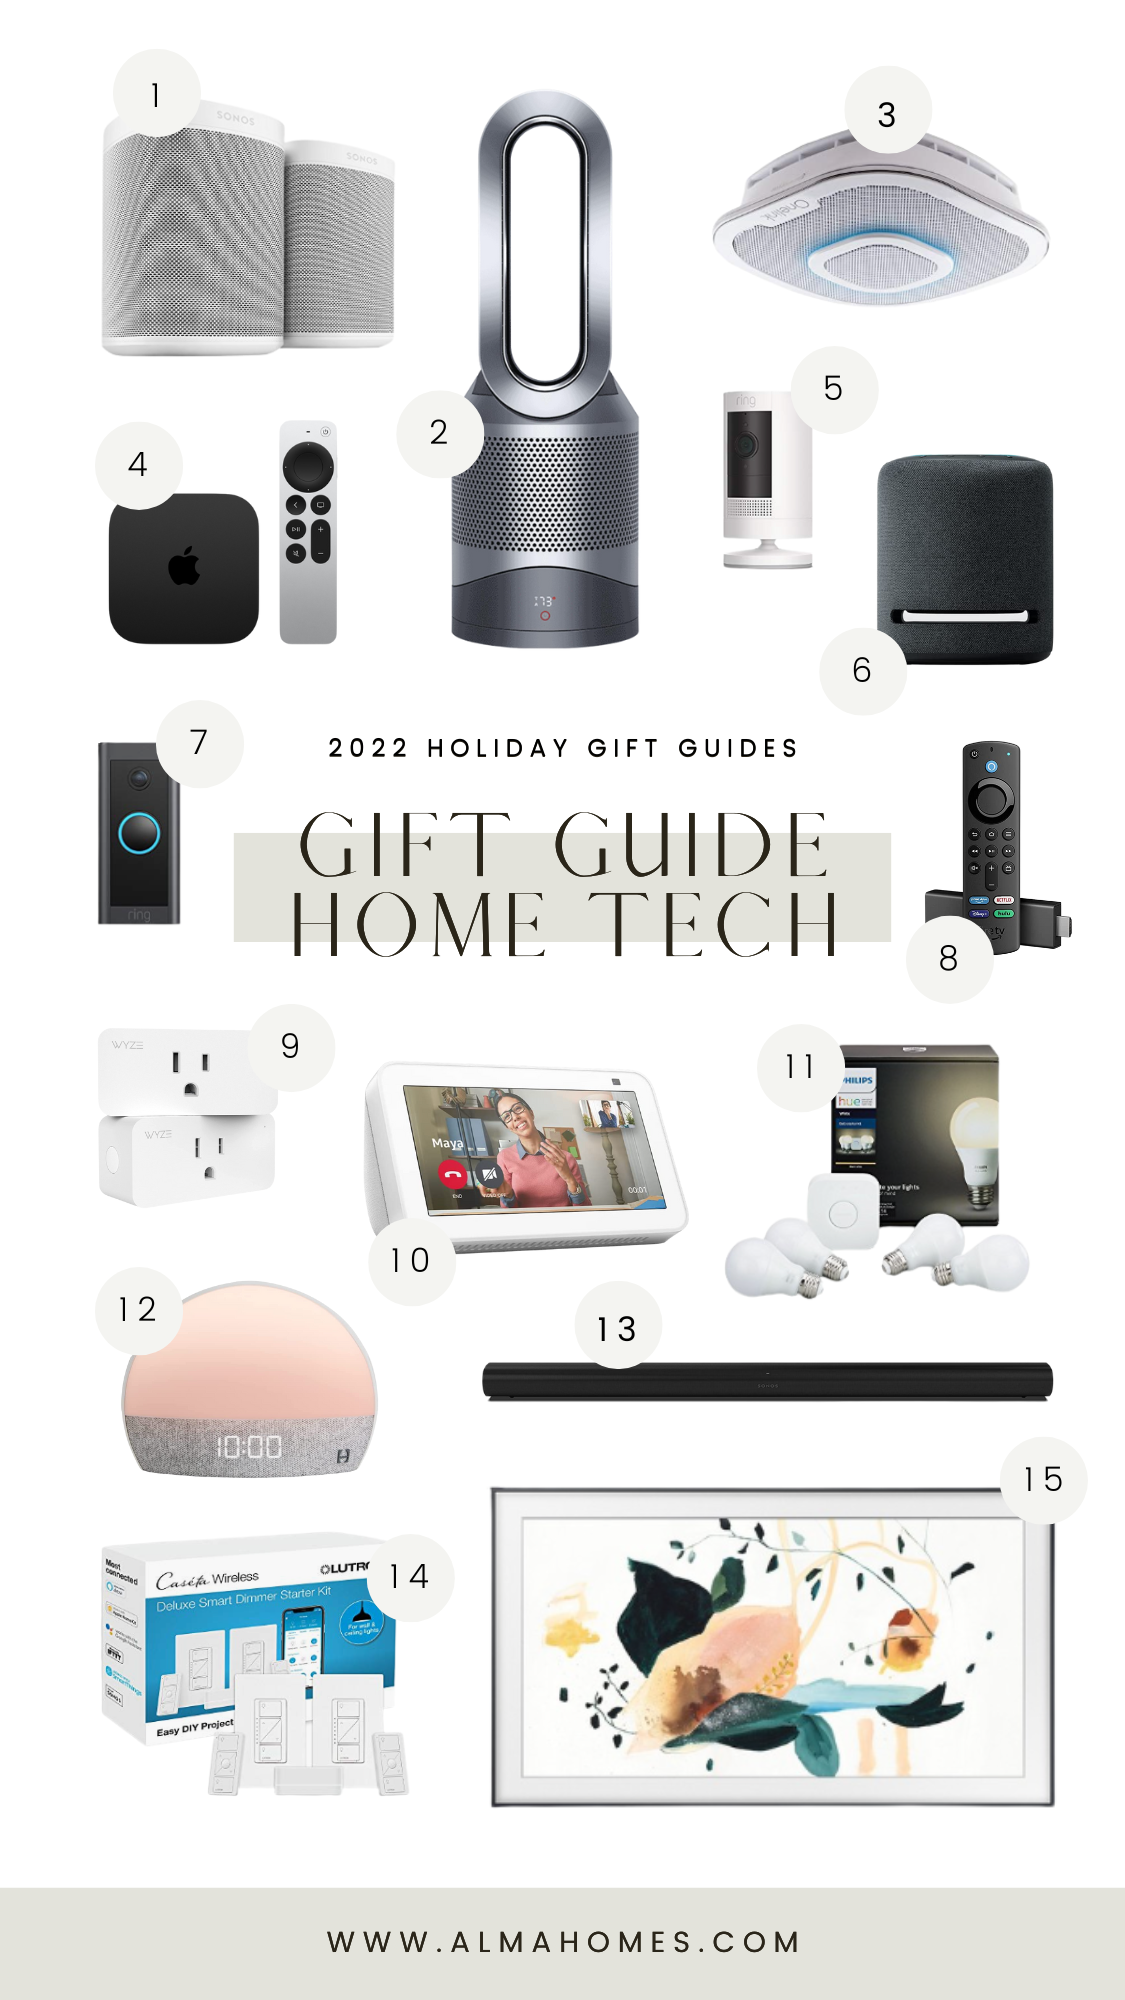 alma-homes-holiday-gift-guide-for-home-technology-2022